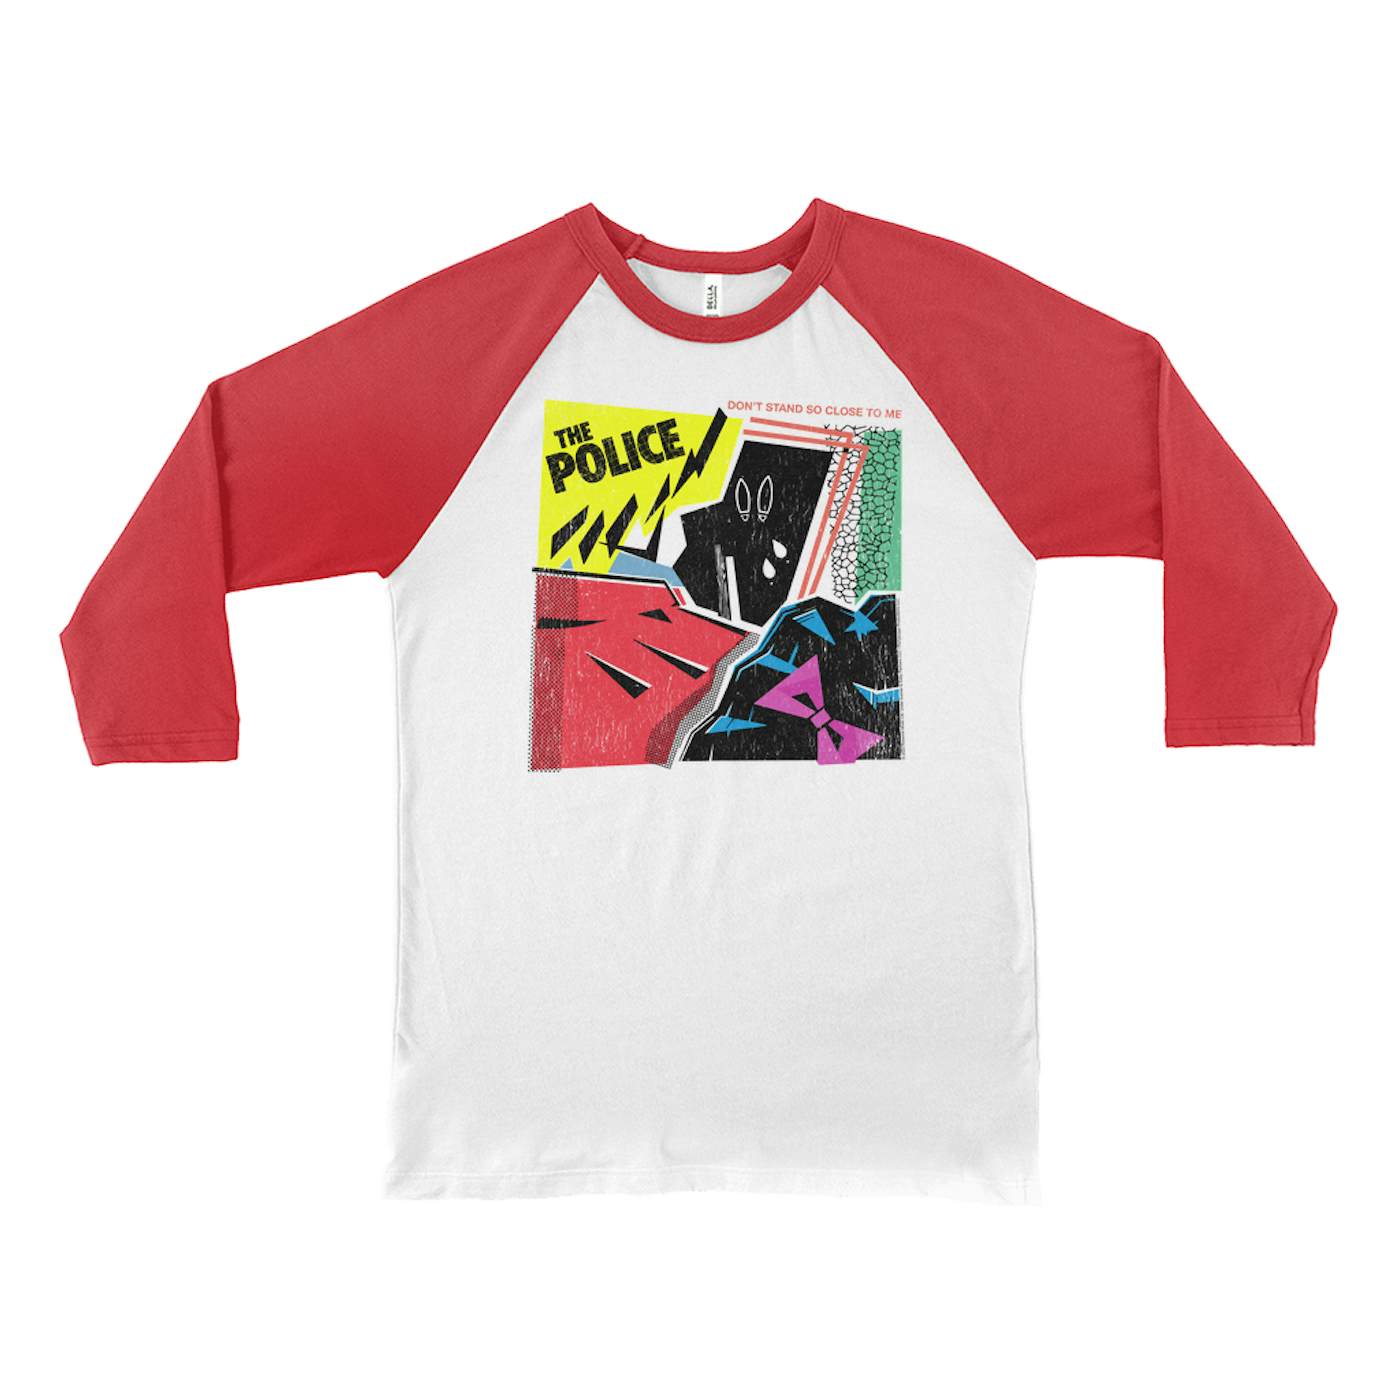 The Police 3/4 Sleeve Baseball Tee | Don't Stand So Close To Me Album Image Distressed The Police Shirt